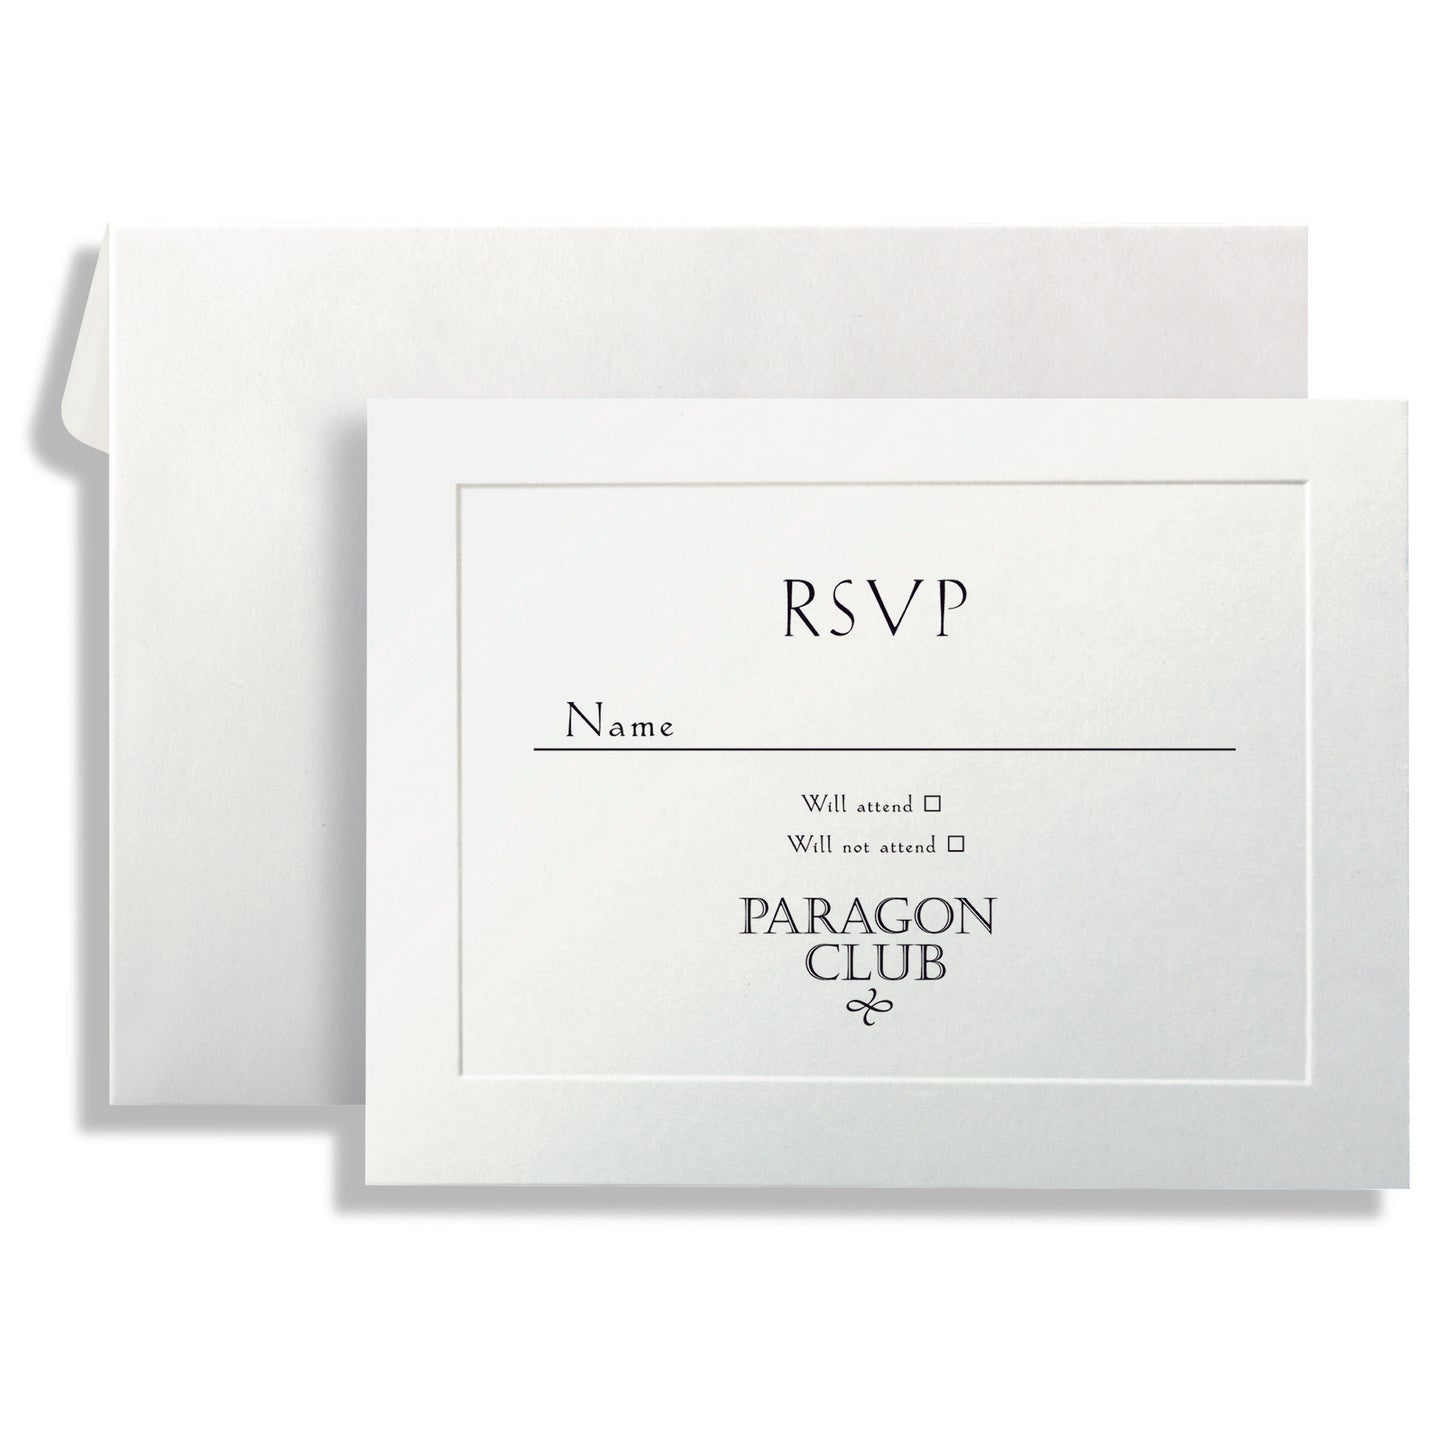 St. James® Overtures®  Reply Cards - Traditional Emboss White, 40 sets